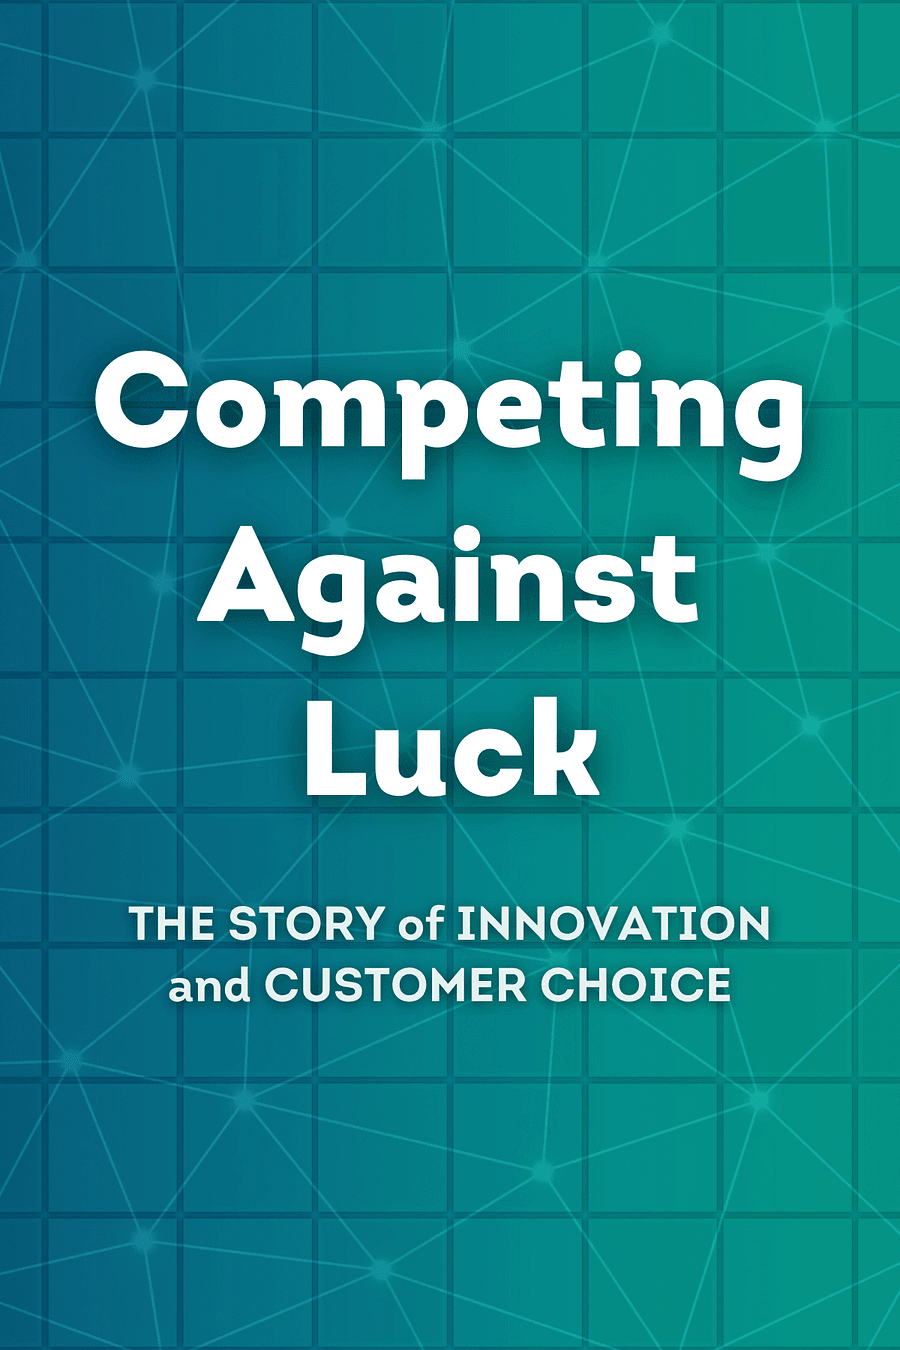 Competing Against Luck by Clayton M. Christensen, Karen Dillon, Taddy Hall, David S. Duncan - Book Summary